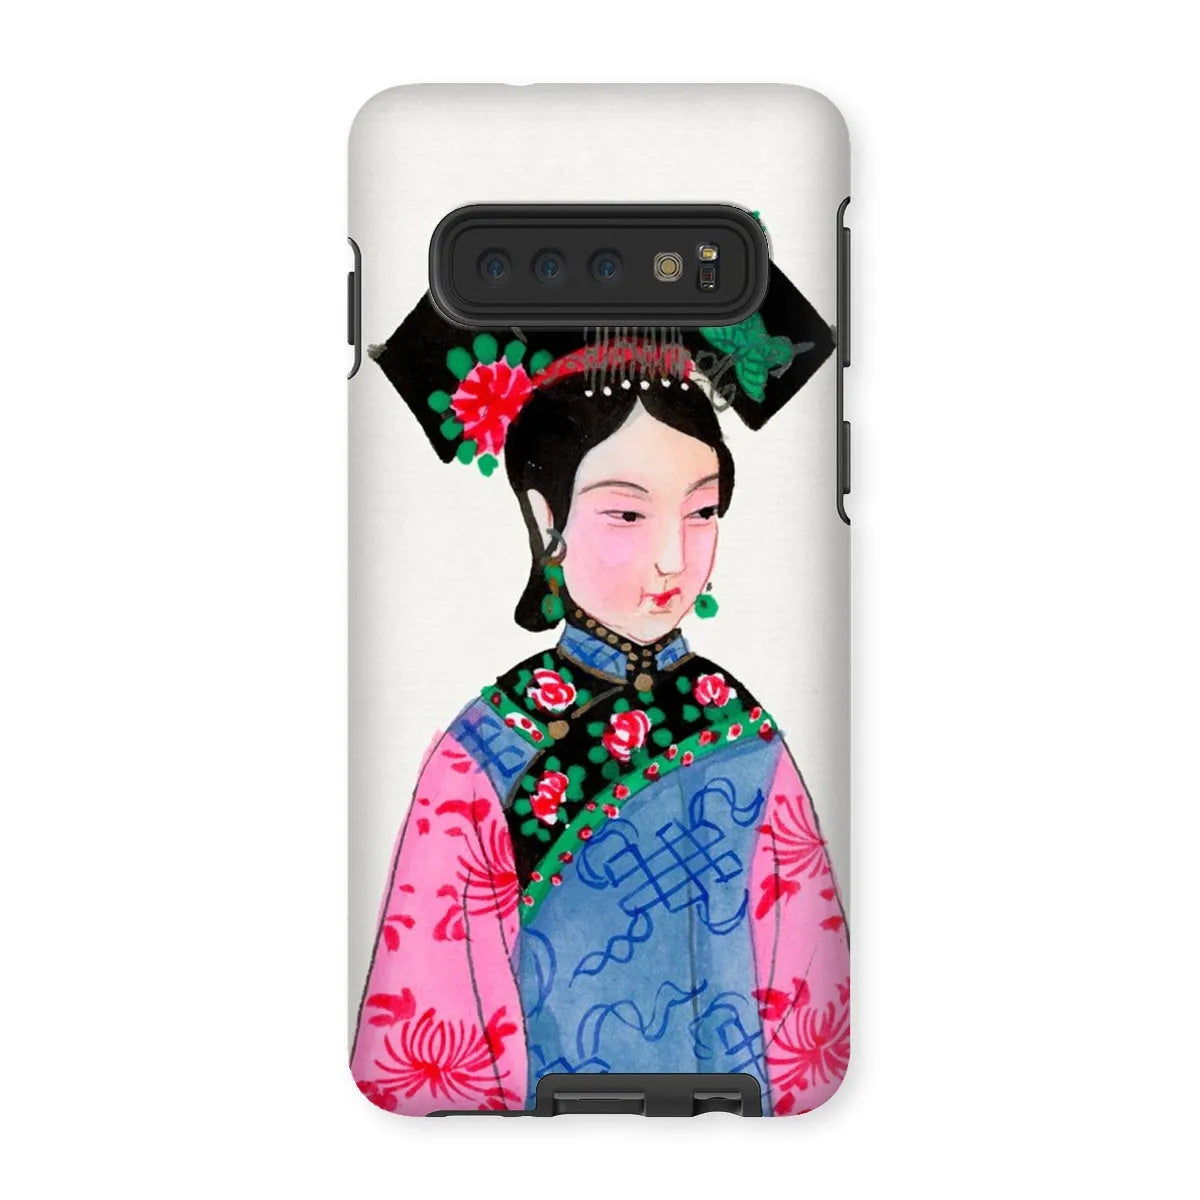 Noblewoman Too - Manchu Aesthetic Art Phone Case - Samsung Galaxy S10 / Matte - Mobile Phone Cases - Aesthetic Art